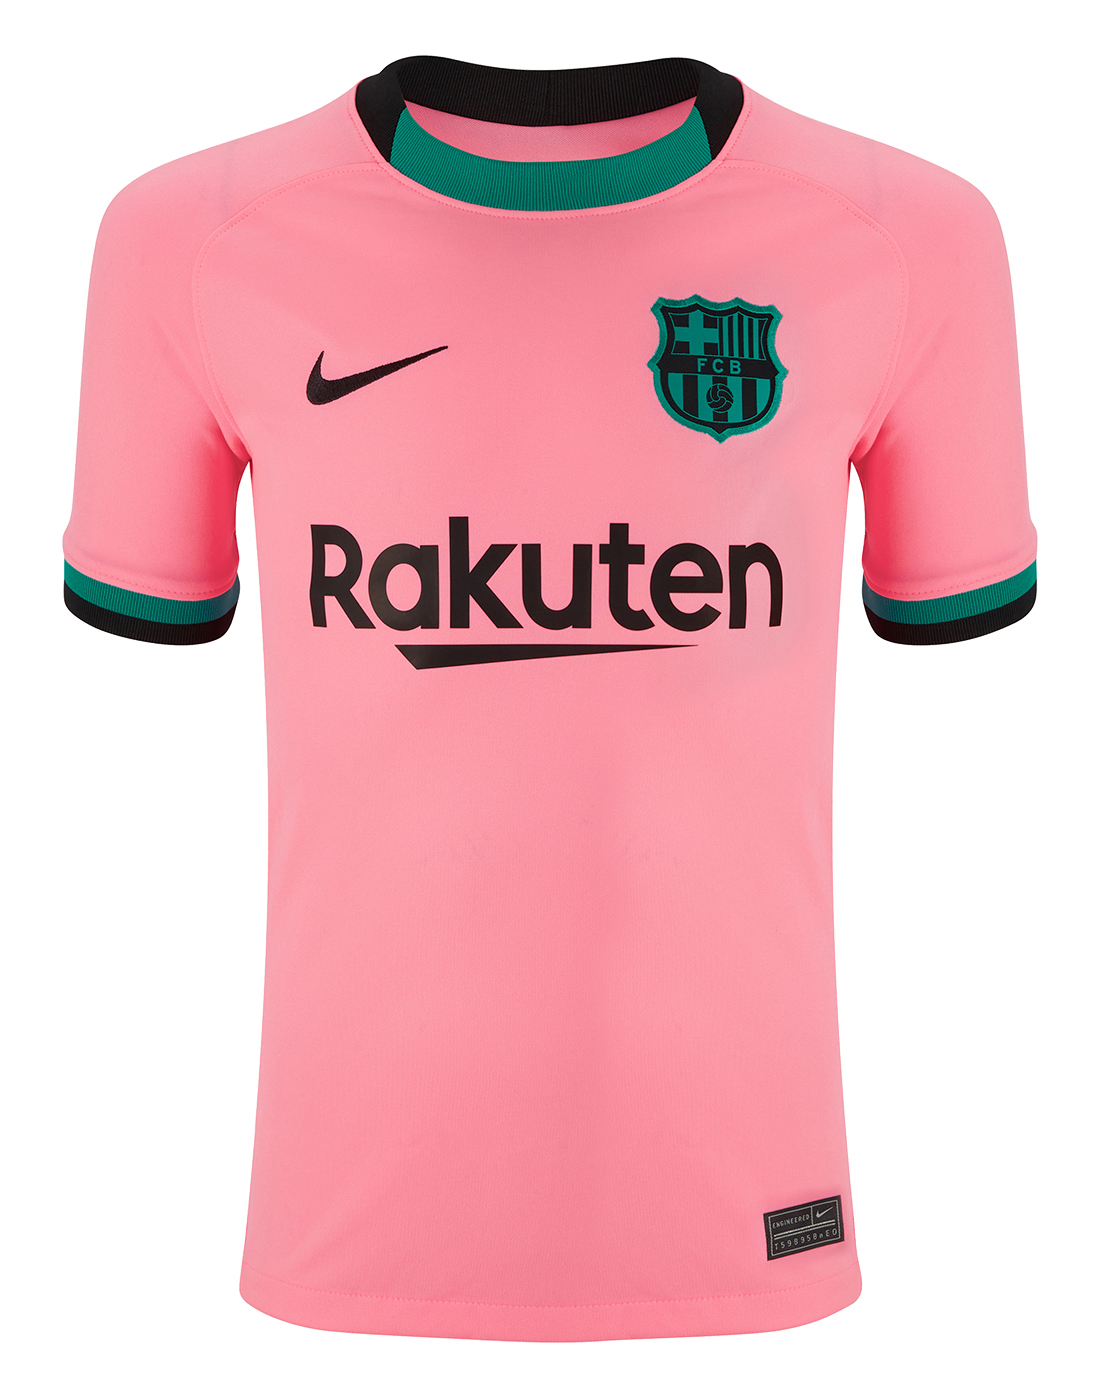 Barcelona and Nike Go Back to Black on Their Clean 20-21 Away Jersey